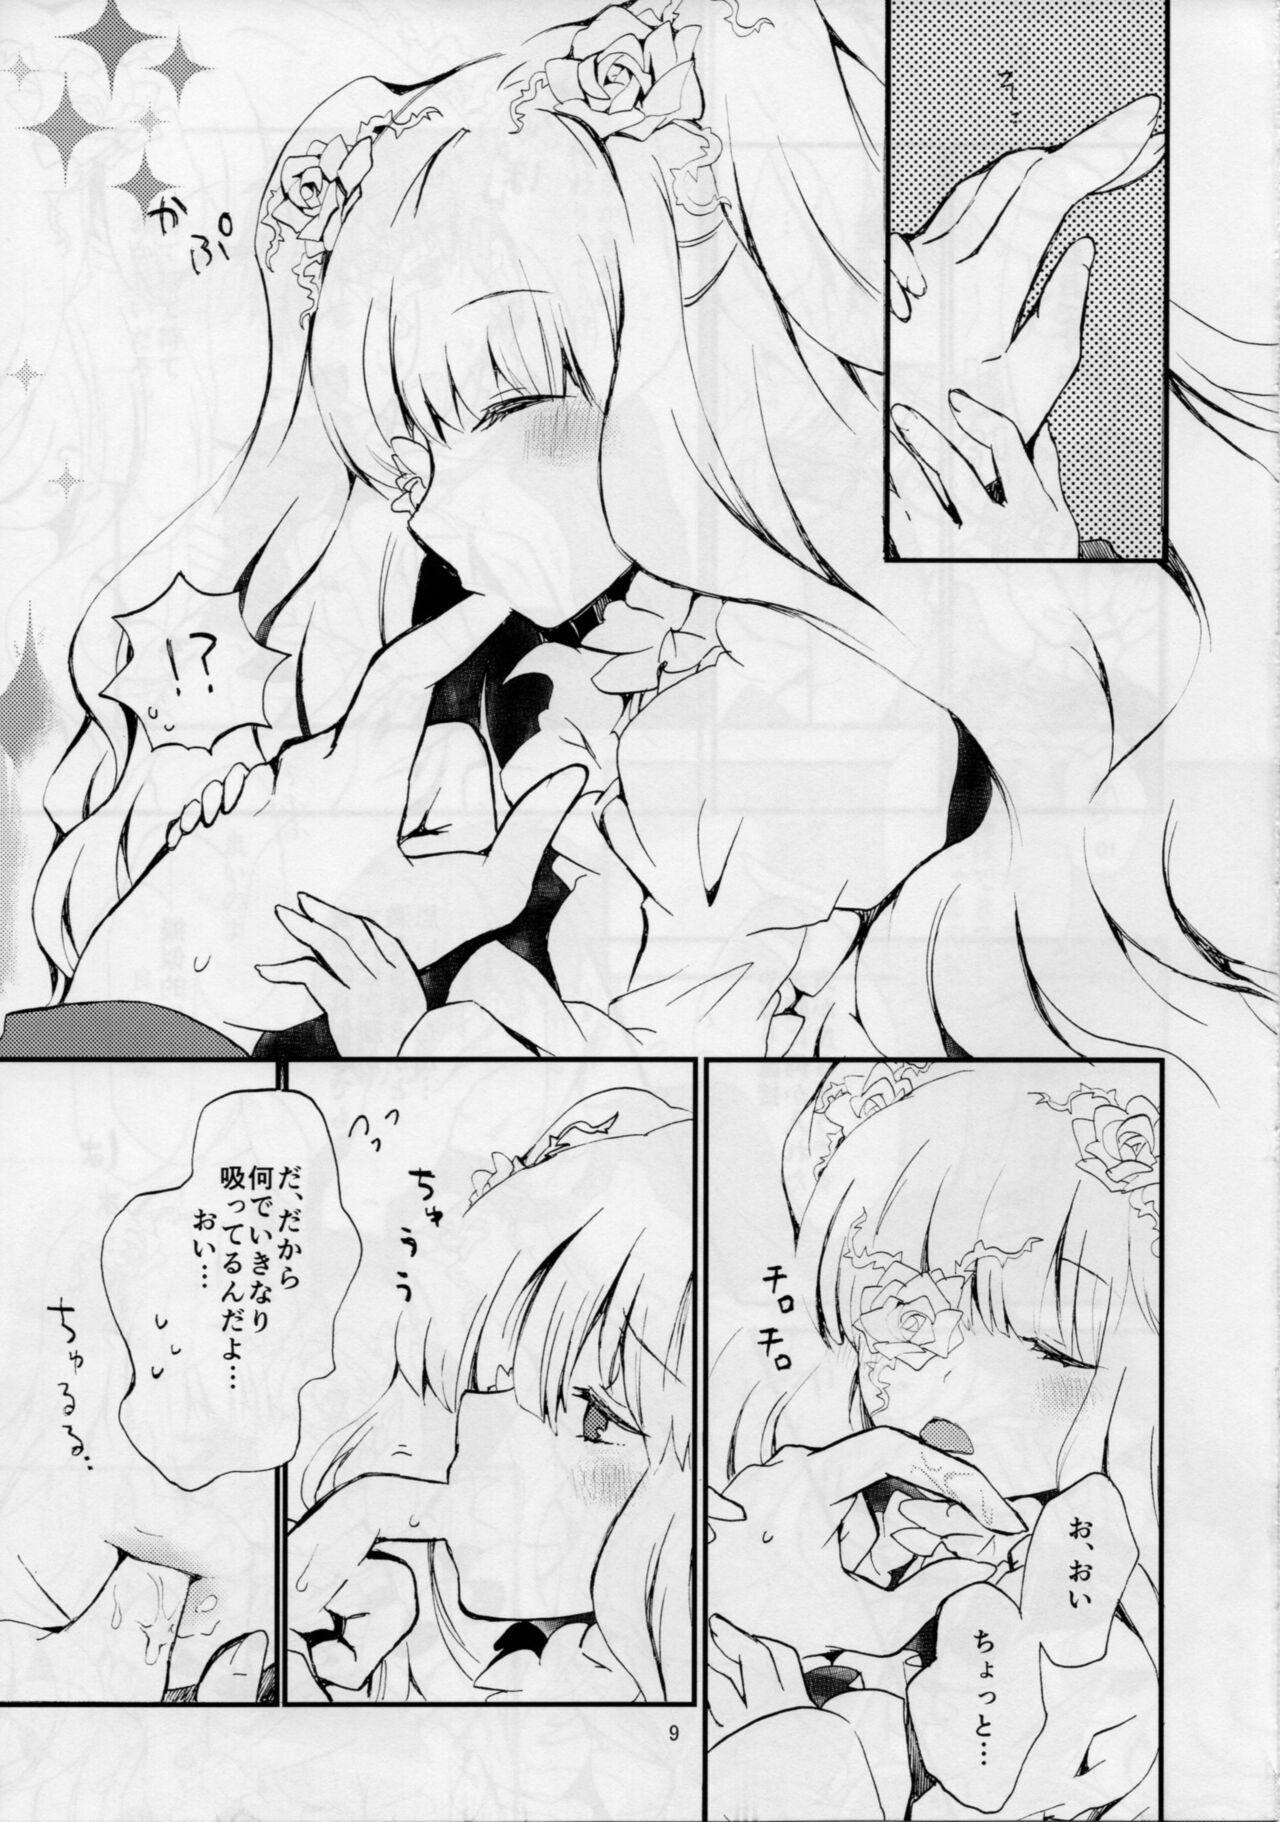 Gay Group Eat me, Drink me - Rozen maiden Fantasy - Page 6